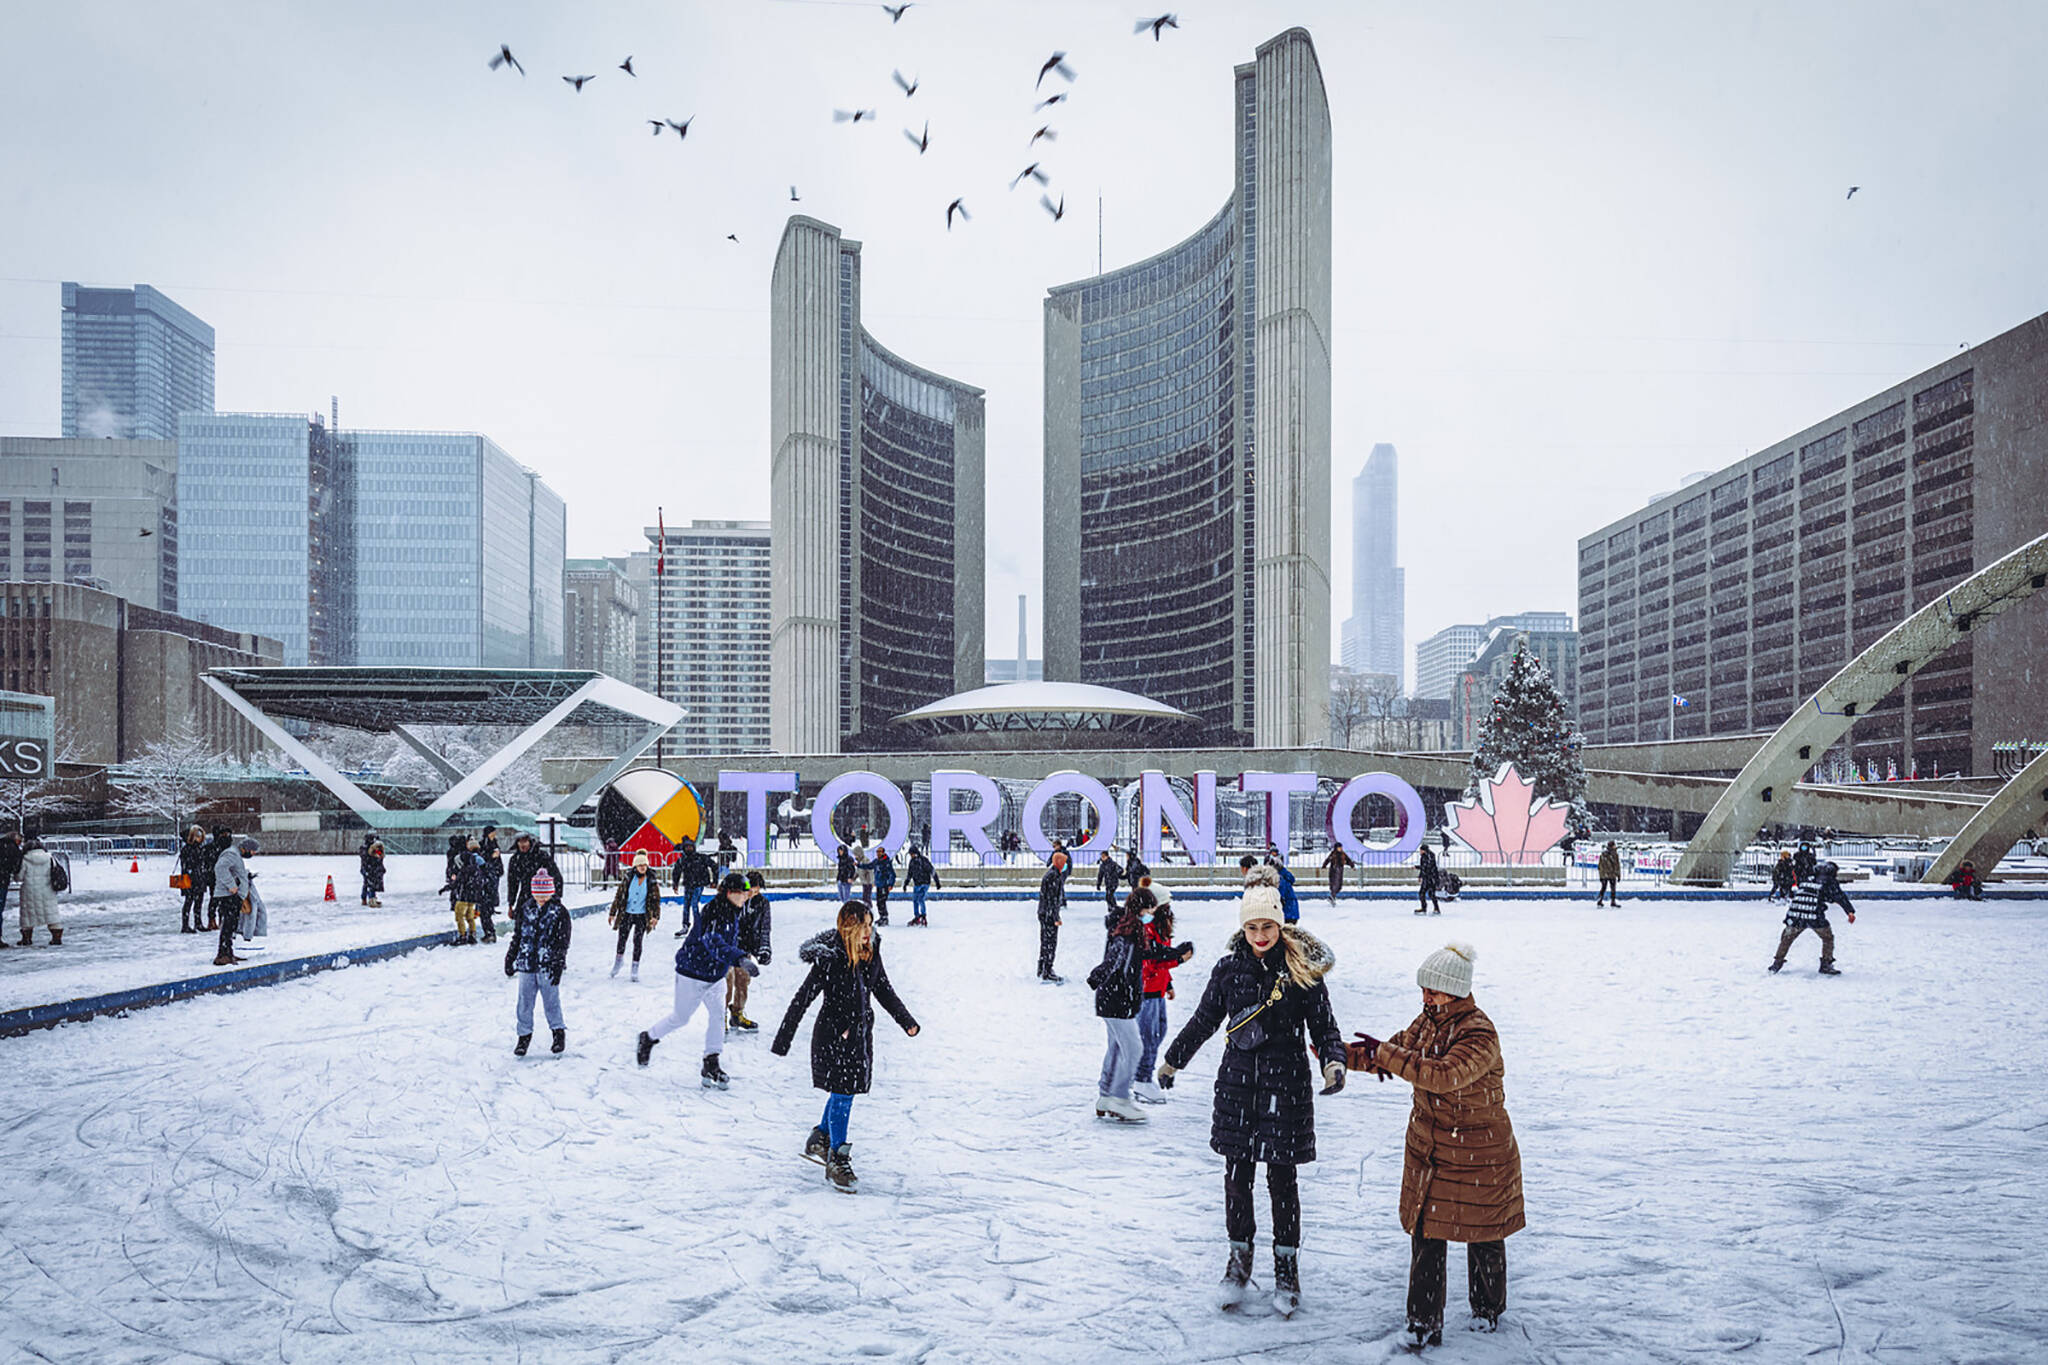 Toronto was just named the best city in Canada to visit during winter